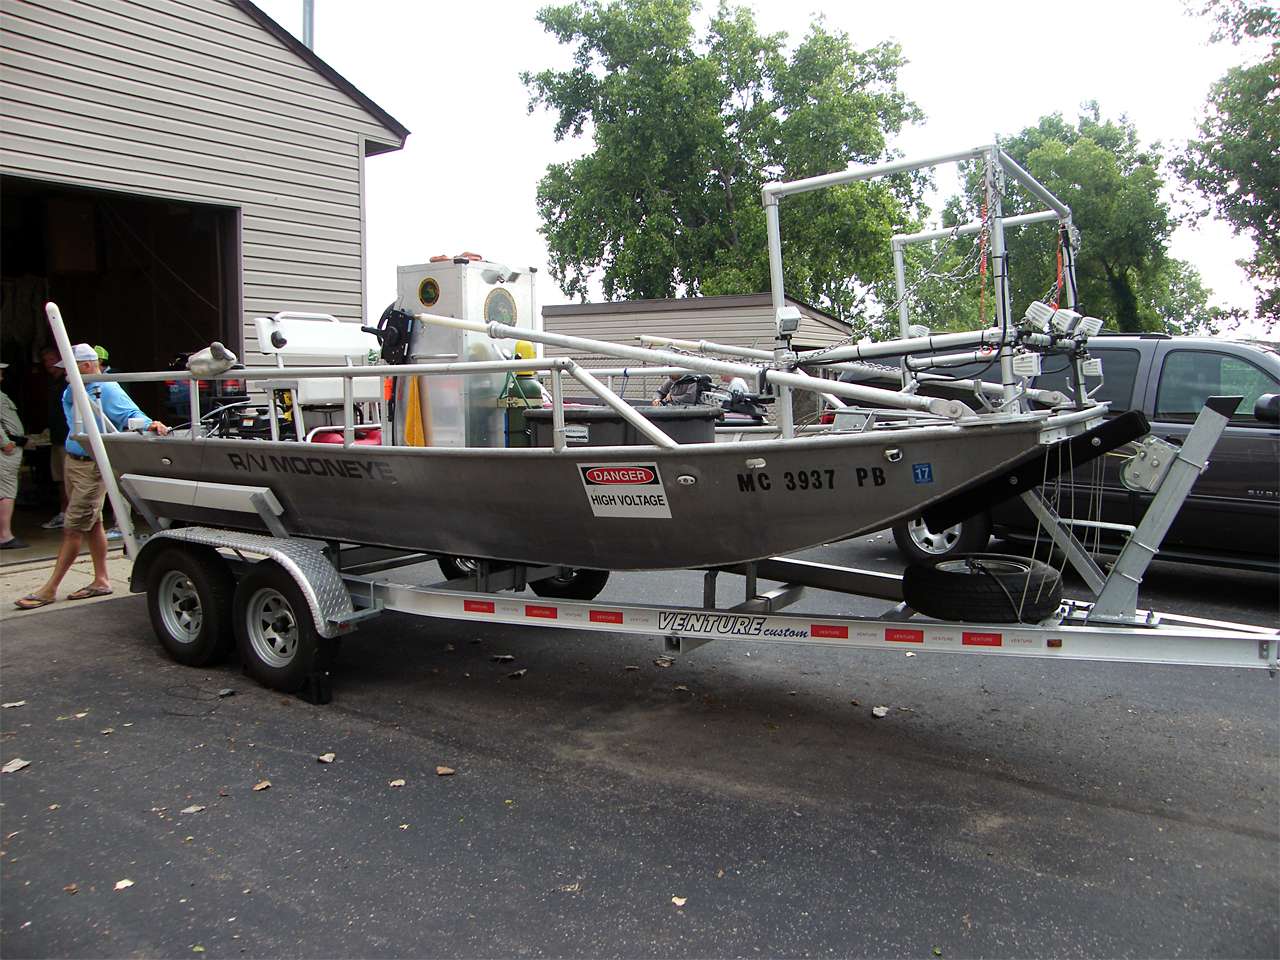 The Michigan DNR shows off the electric shock research boat, the R/V Mooneye.